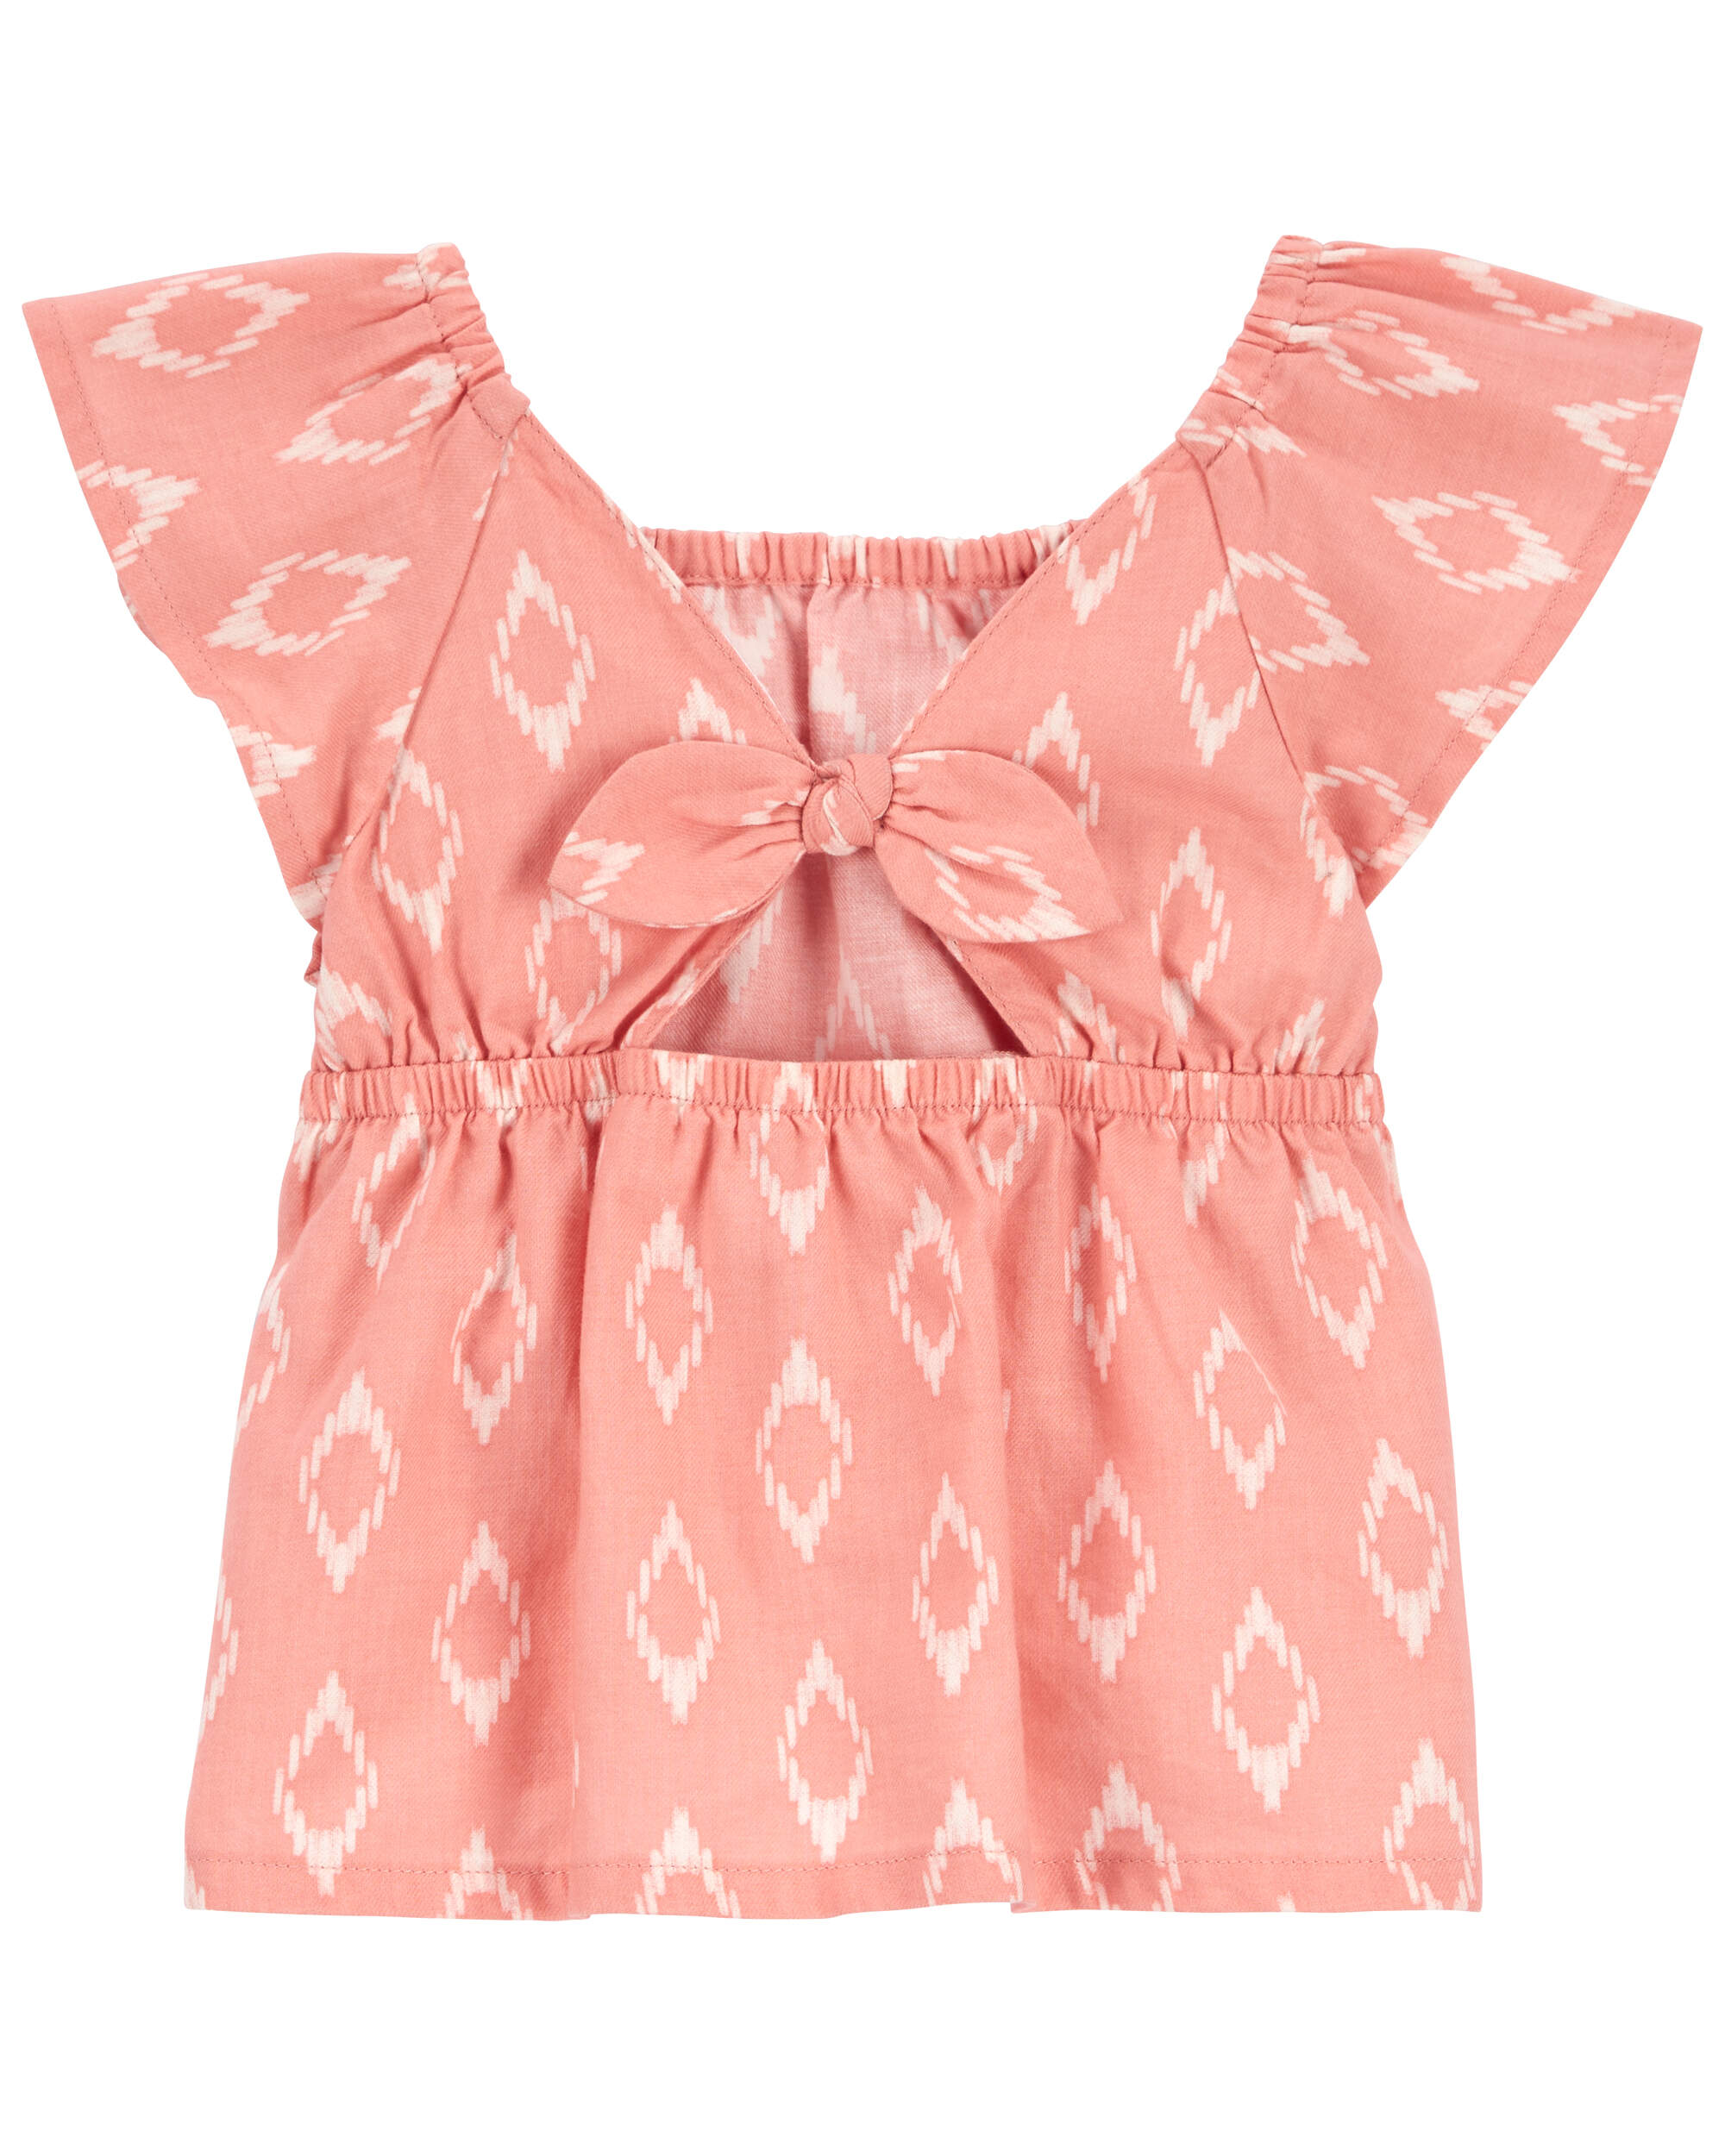 Baby 2-Piece Linen Outfit Set